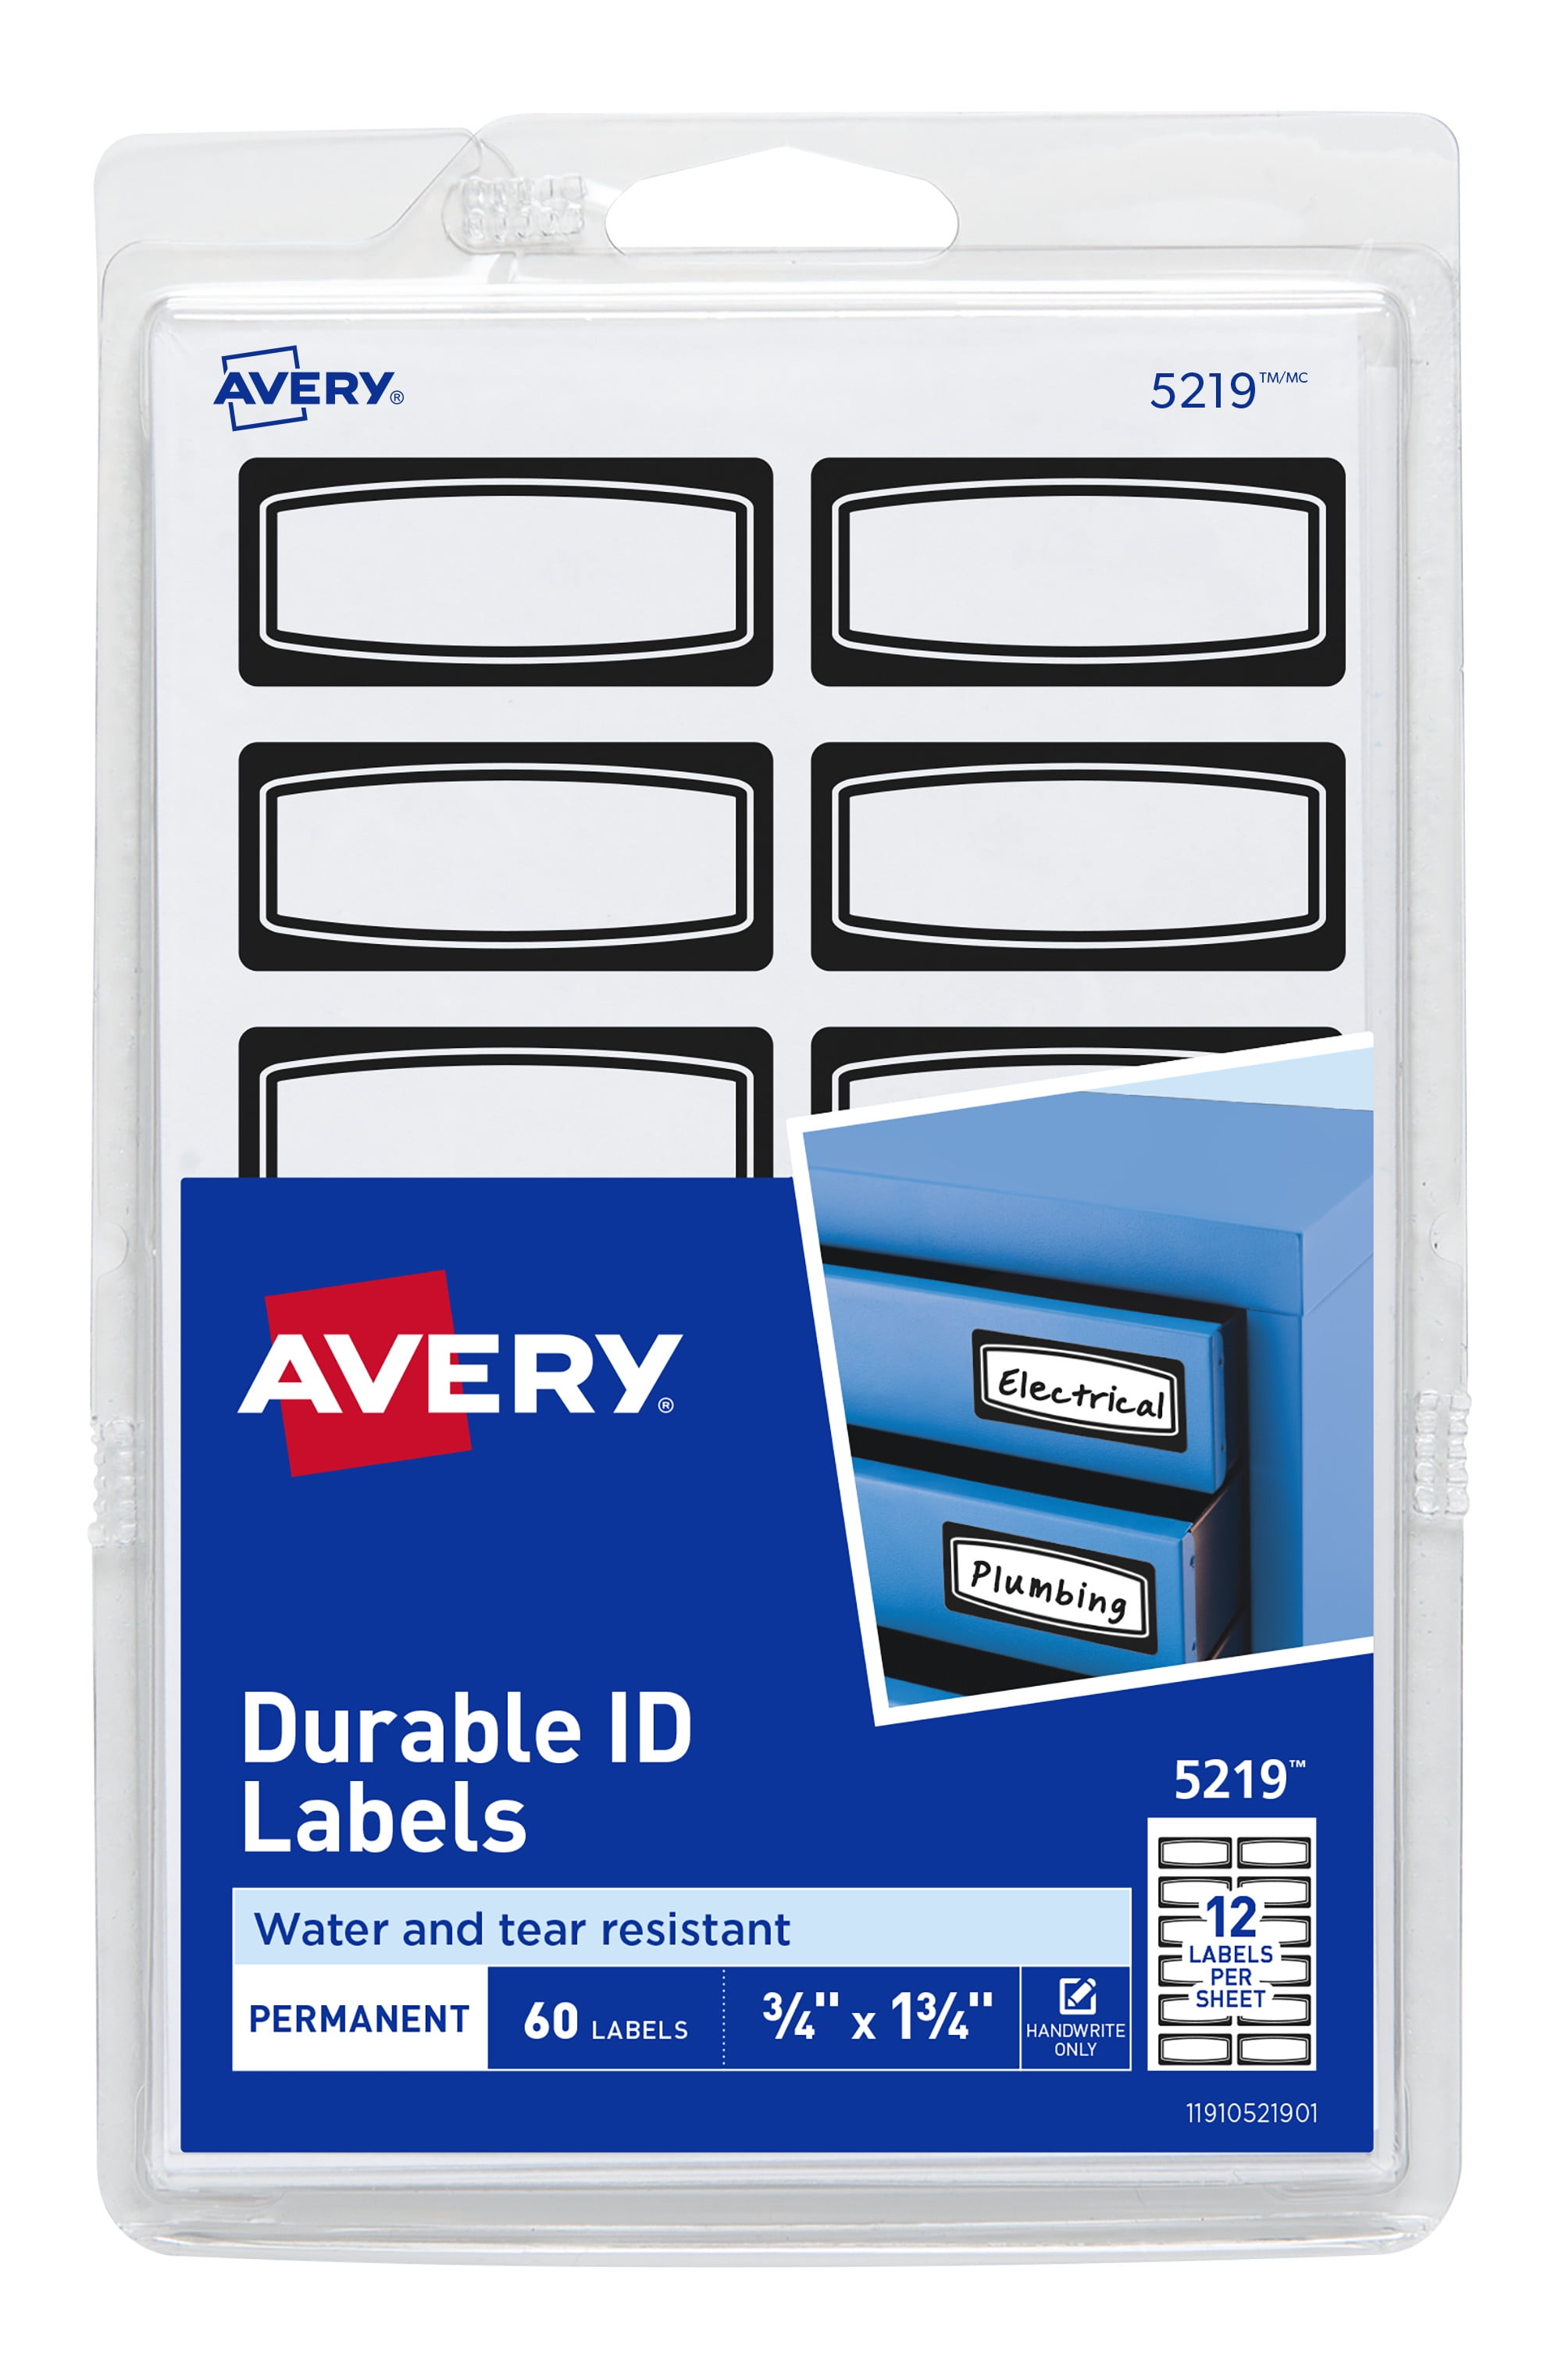 Avery Durable ID Labels, White with Black Border, 3/" x 1-3/4", Permanent, Handwrite, 60 Labels (15219)